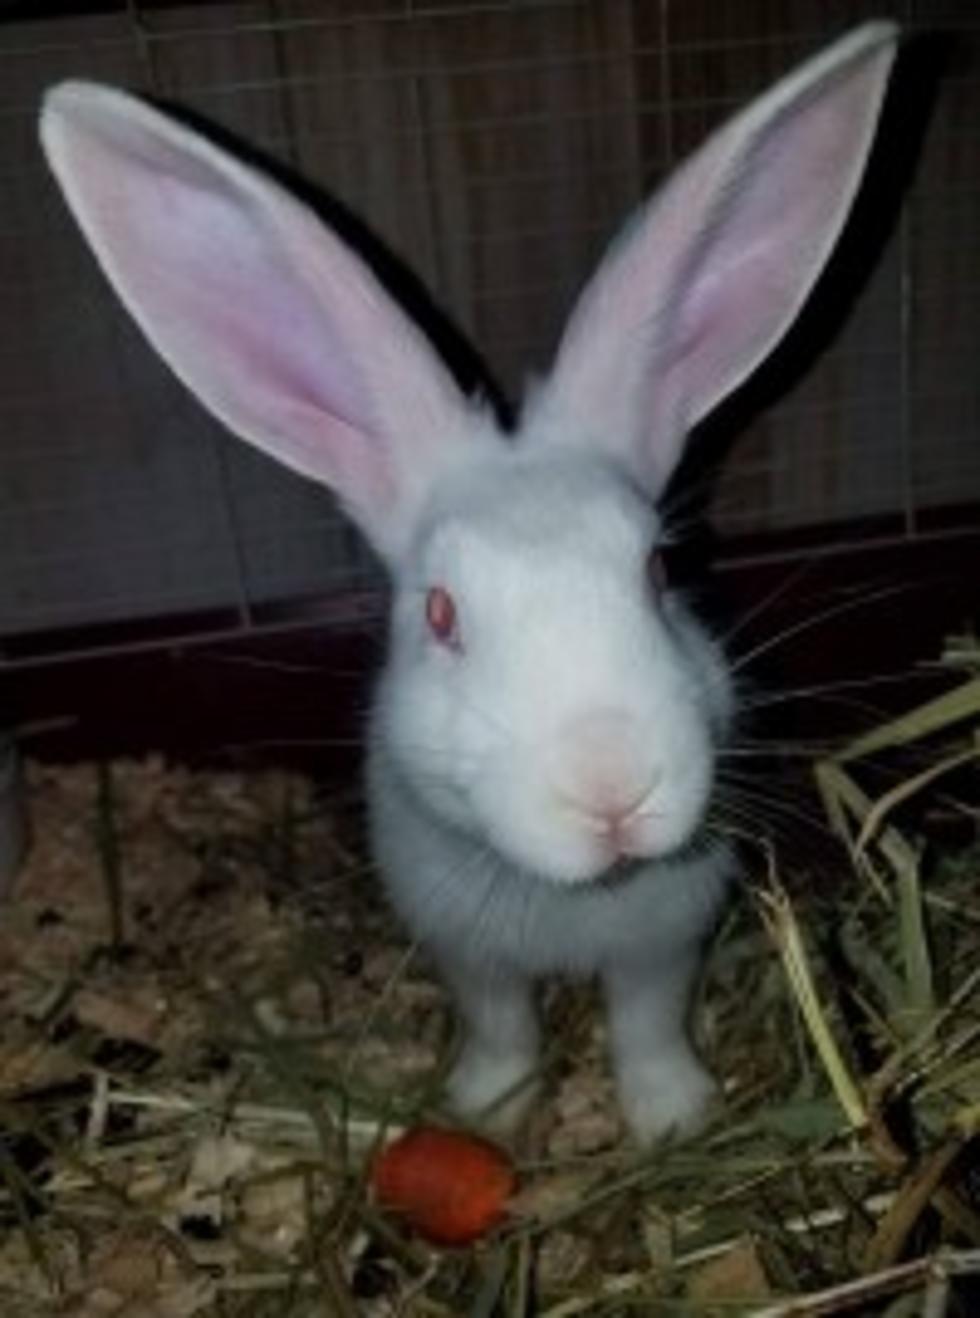 Have You Seen This Bunny? Help Bring Him Home